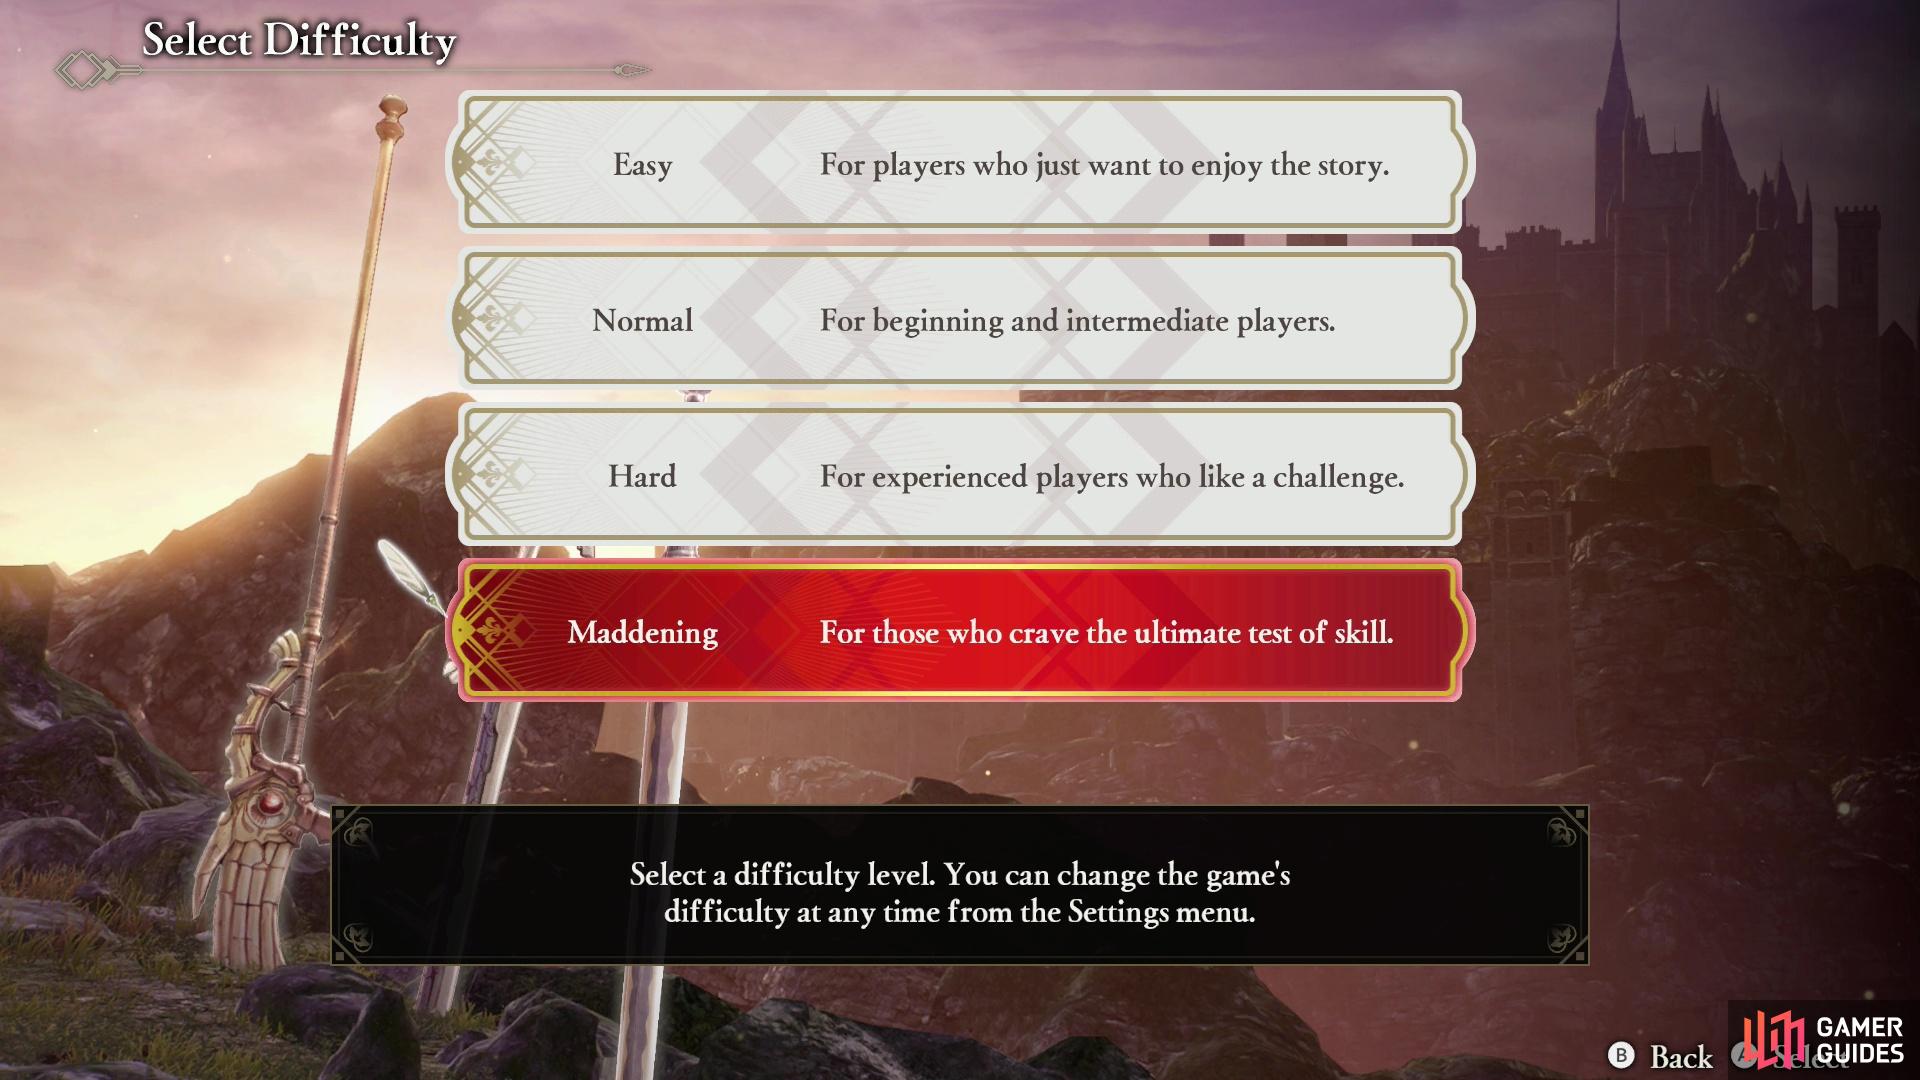 Beat the game once on any difficulty and you’ll be able to select Maddening difficulty on subsequent playthroughs.